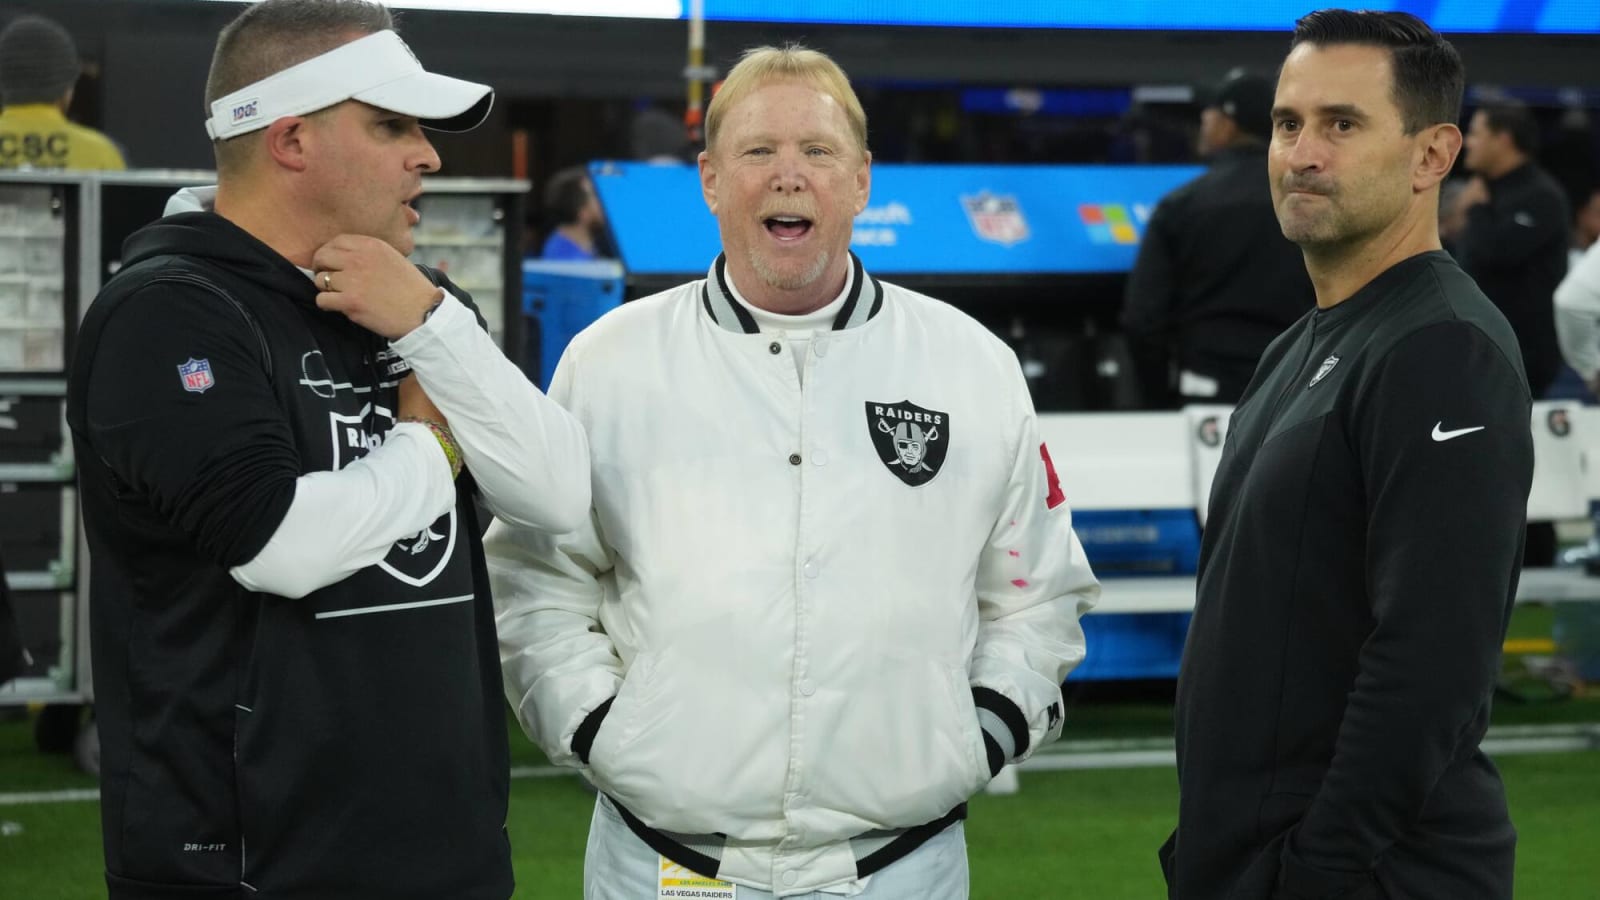 What Will The Raiders’ Legacy Of Josh McDaniels And Dave Ziegler Be?